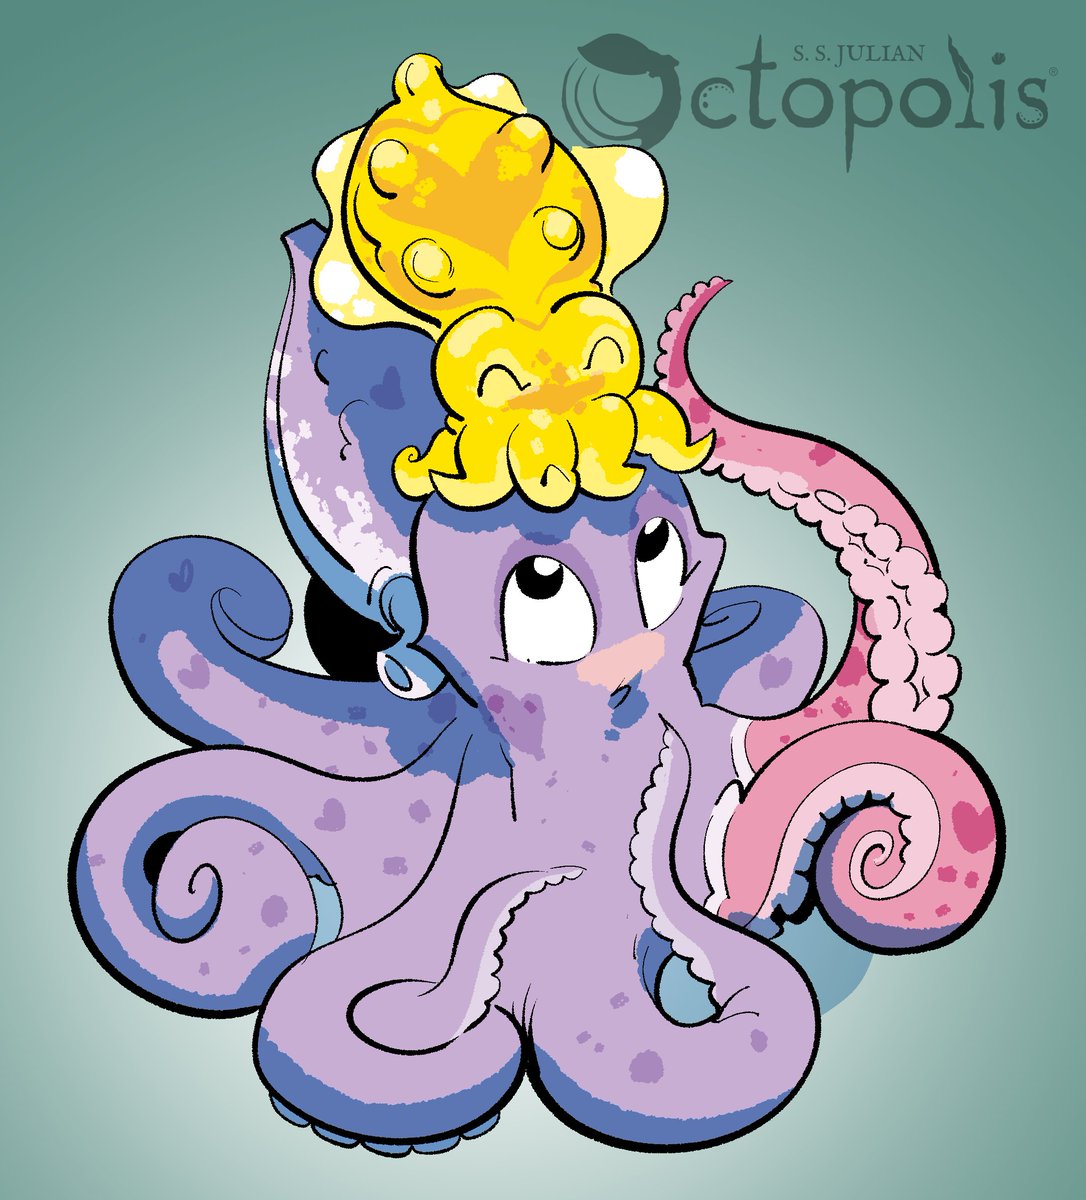 Brainstorming concepts for the Stumpy sticker set that all backers earned when we beat our 12k stretch goal! This technically includes Kurita too, but I think it's cute. What do you think, would it make a good sticker?

#octopolis #cephalopod #drawing #comic